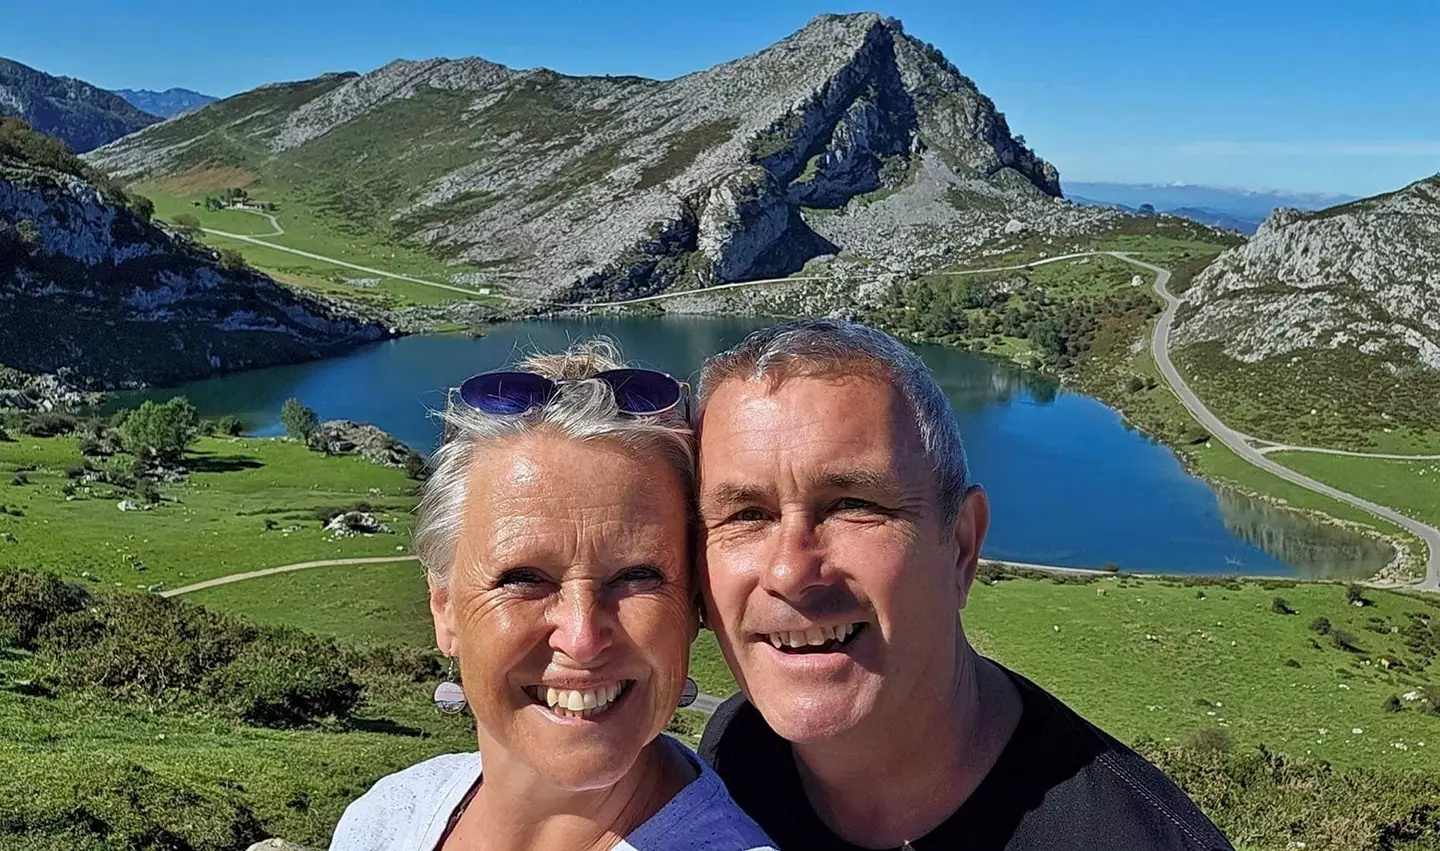 The adventurous couple say life on the road is miles better than the UK. (SWNS)